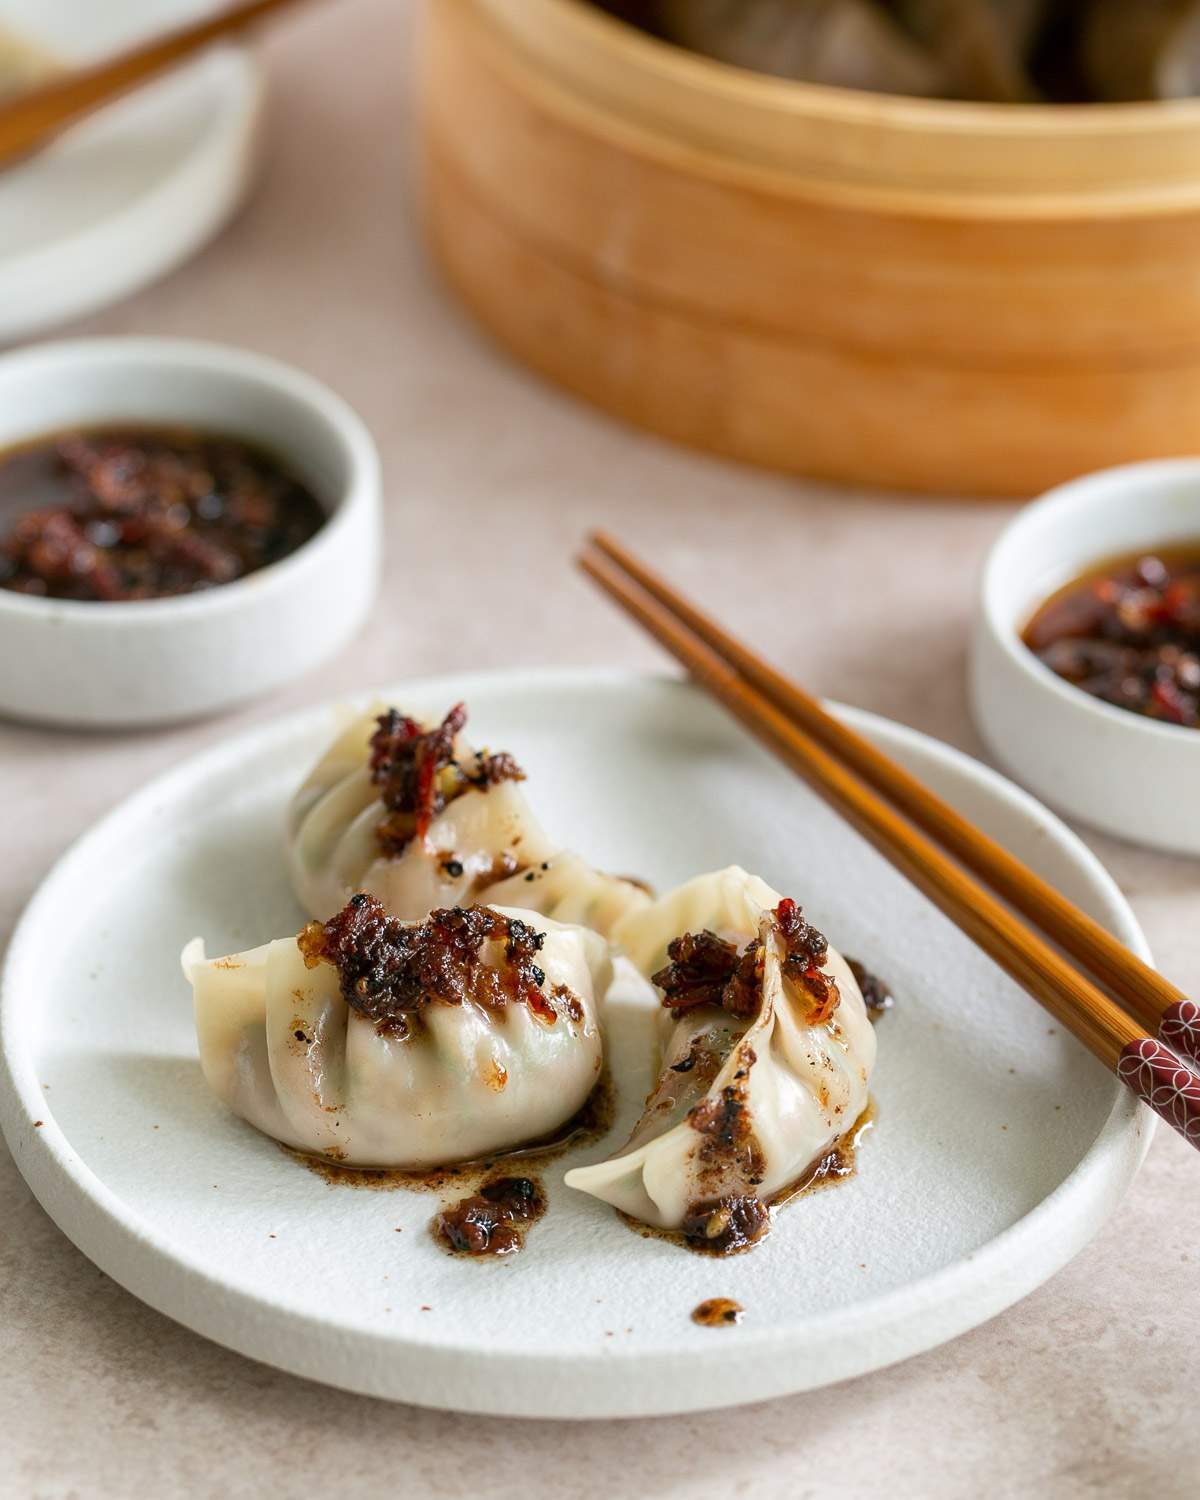 Chili oil with dumplings